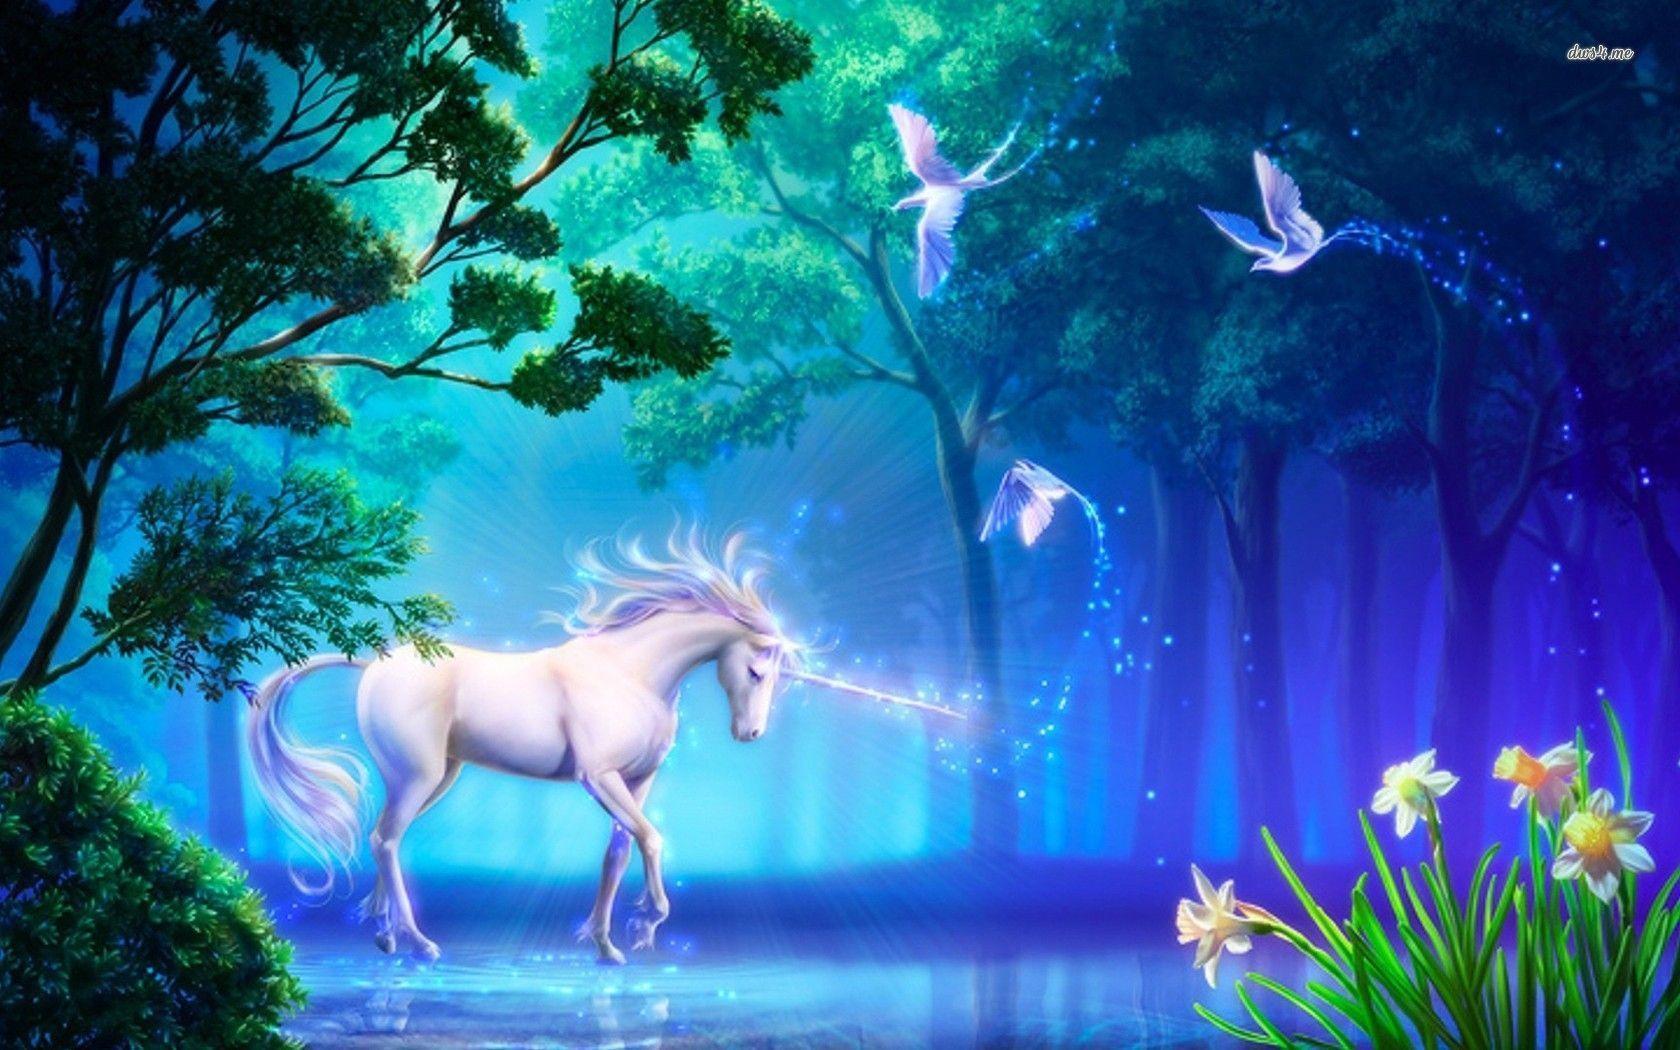 Free Download Unicorn Desktop Backgrounds 1680x1050 For Your